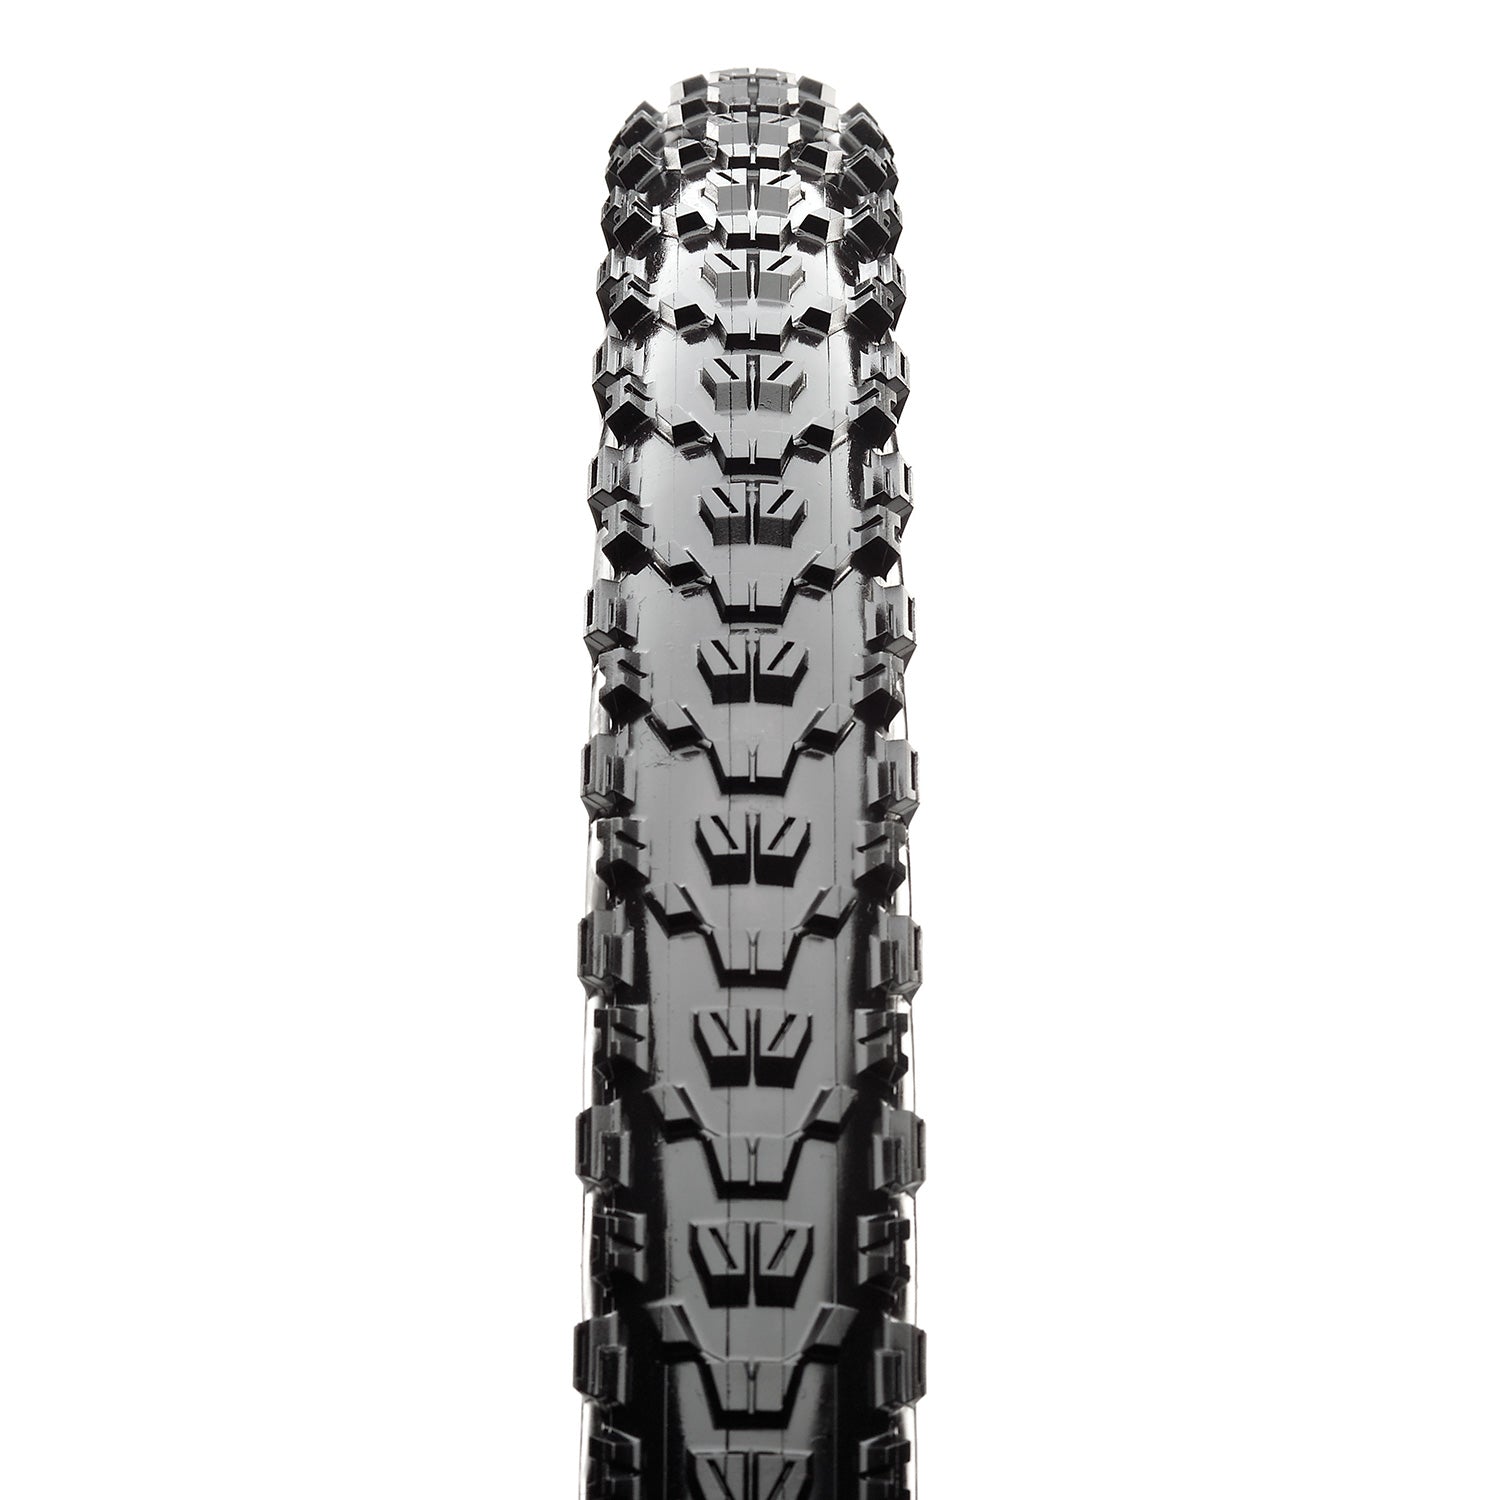 Maxxis Ardent Skinwall Tire - The PM Cycles - Singapore | Fidlock - Forbidden Bike 